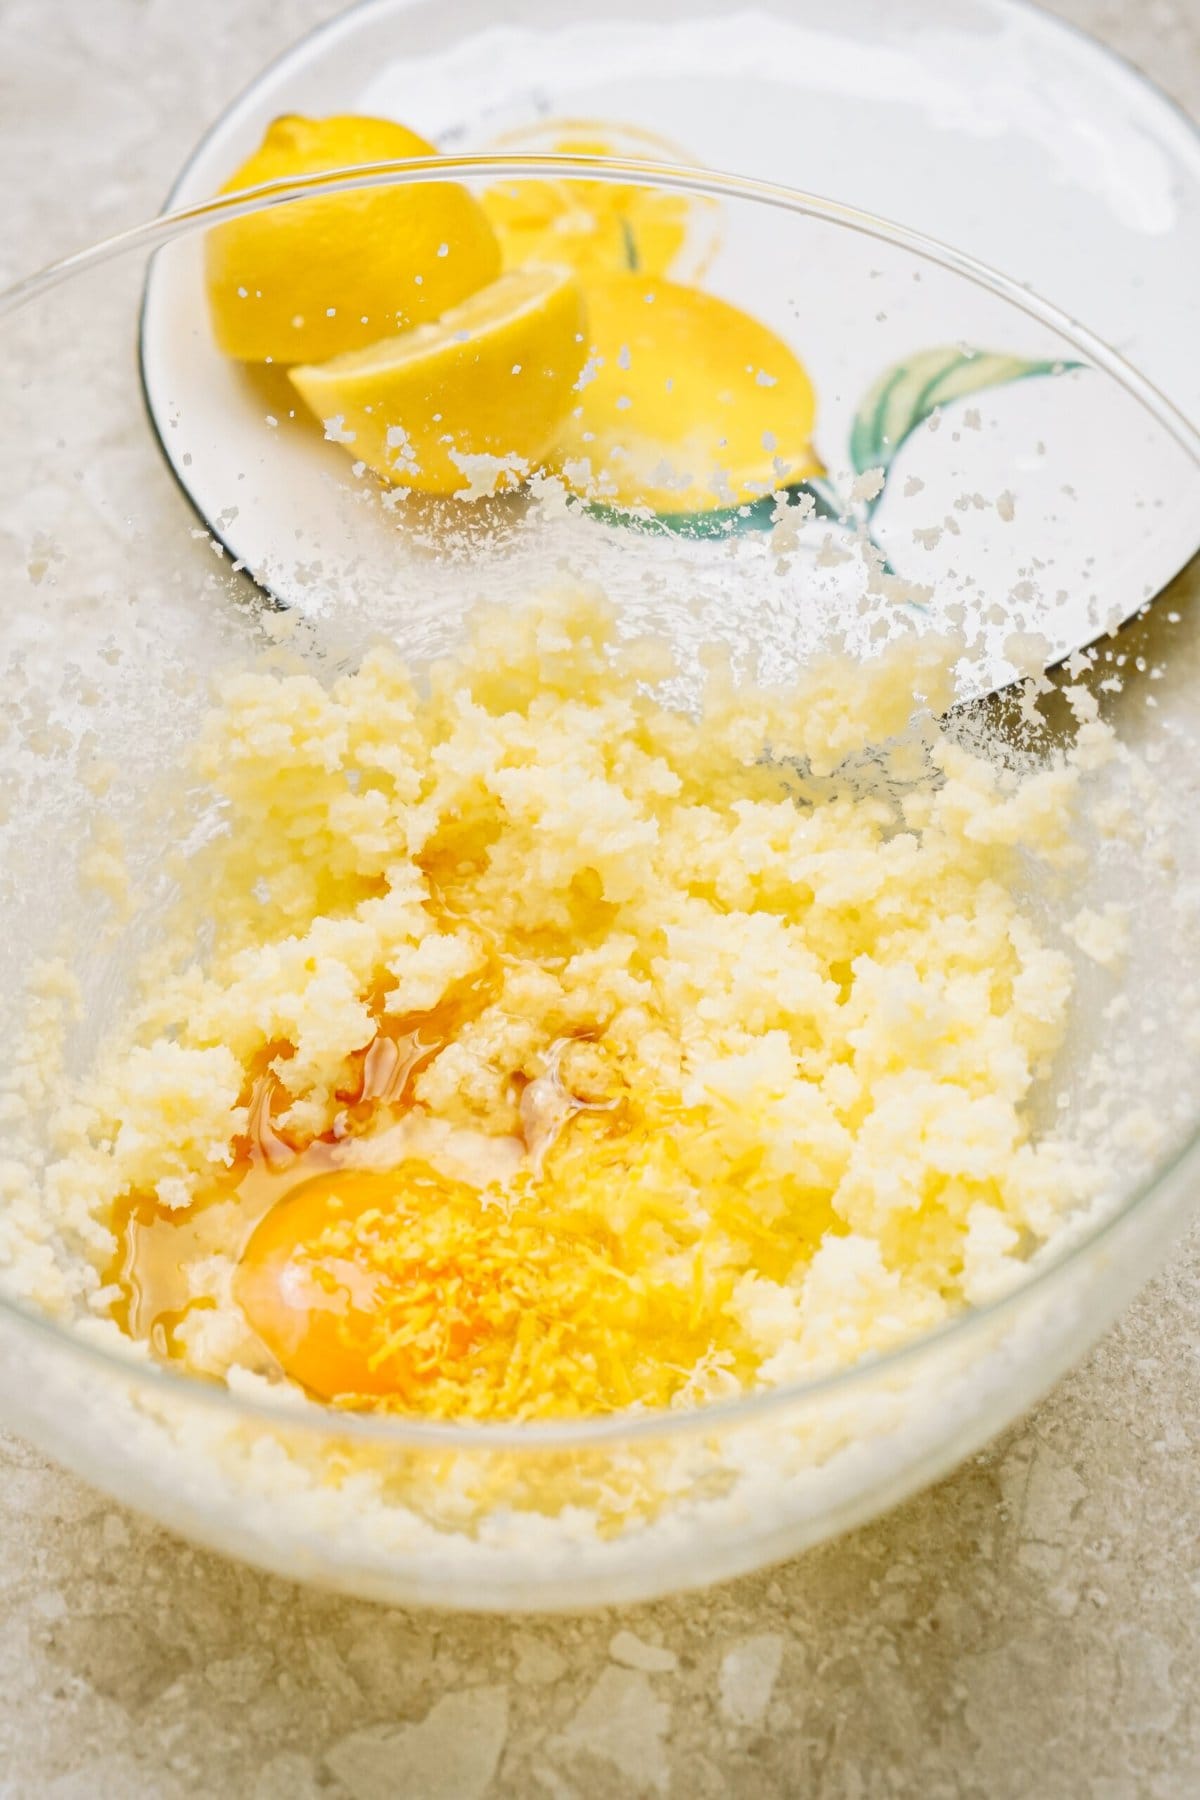 Ingredients in a bowl for baking, including flour and eggs, with a whisk on top.